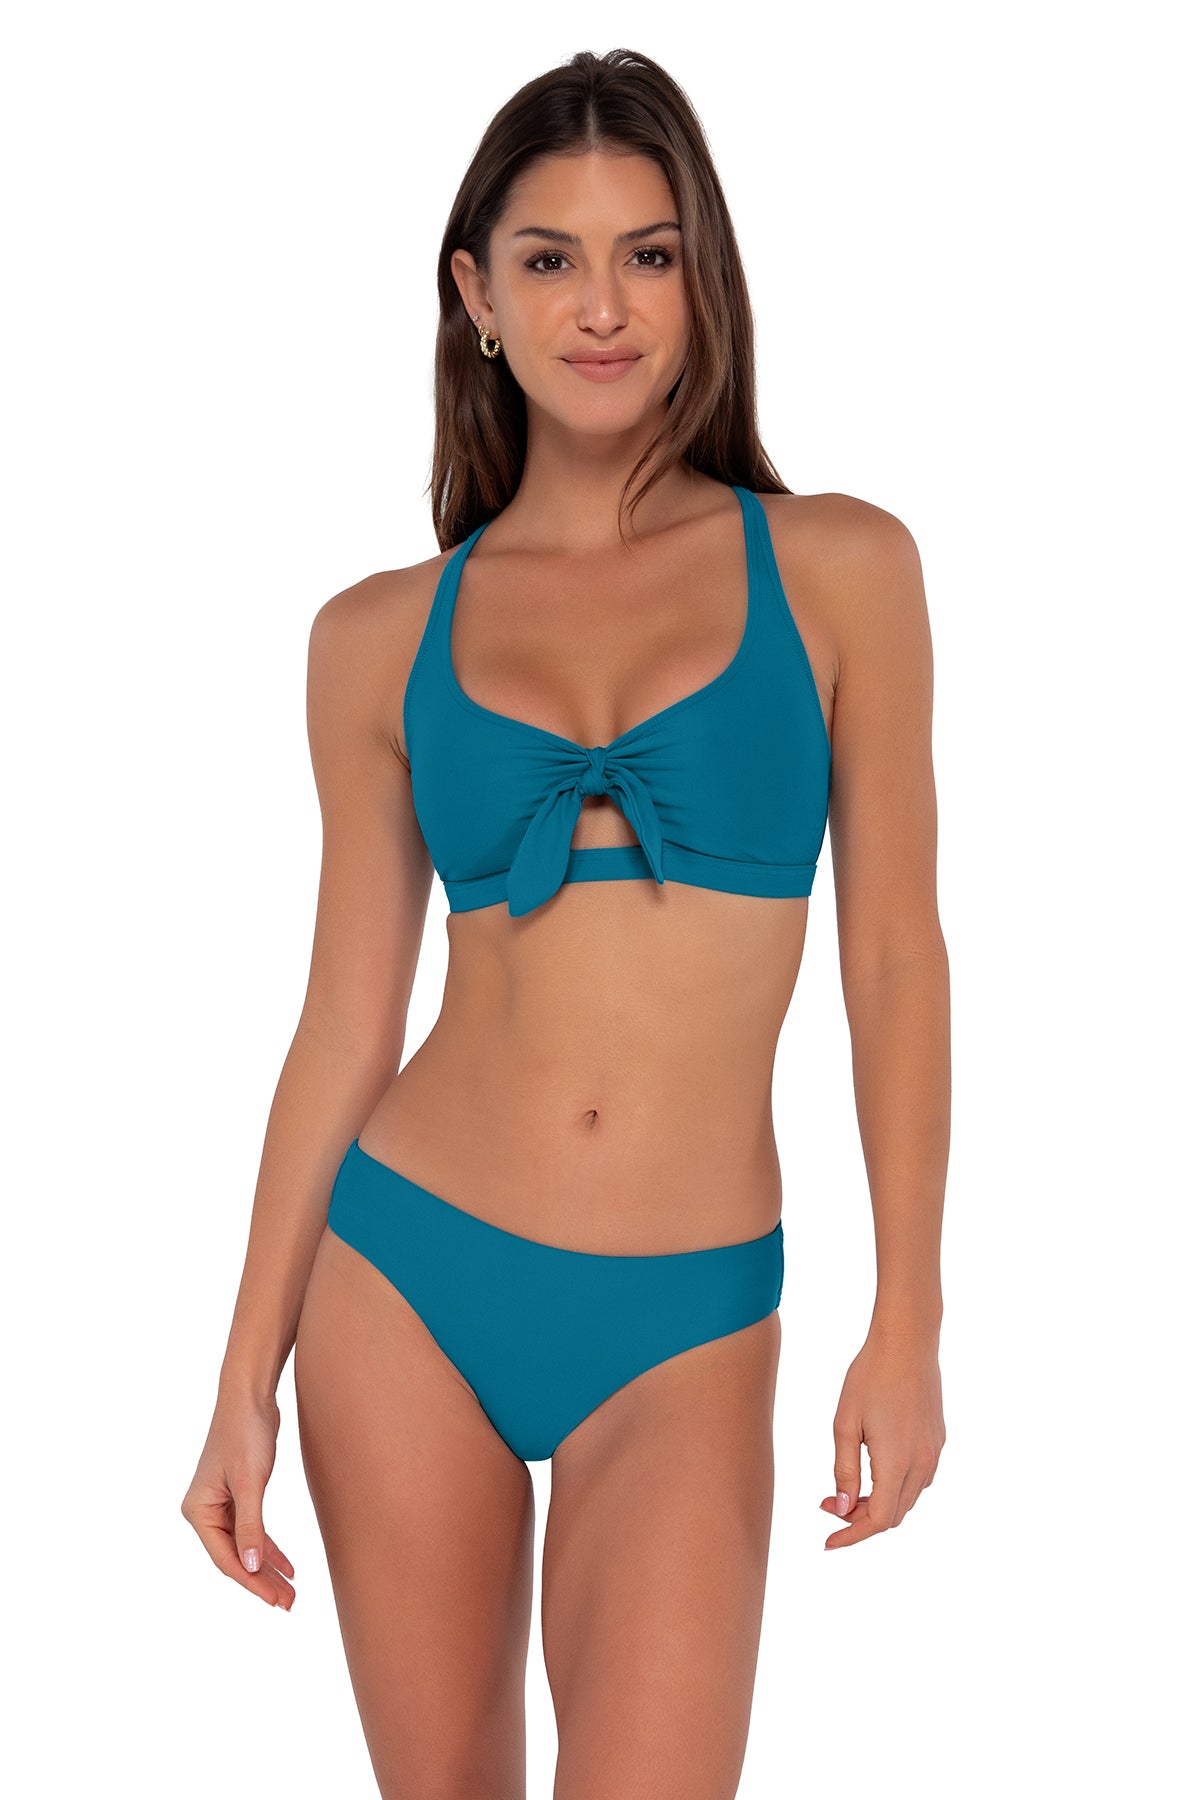 Front pose #1 of Gigi wearing Sunsets Avalon Teal Brandi Bralette Top showing keyhole front tie paired with Collins Hipster bikini bottom